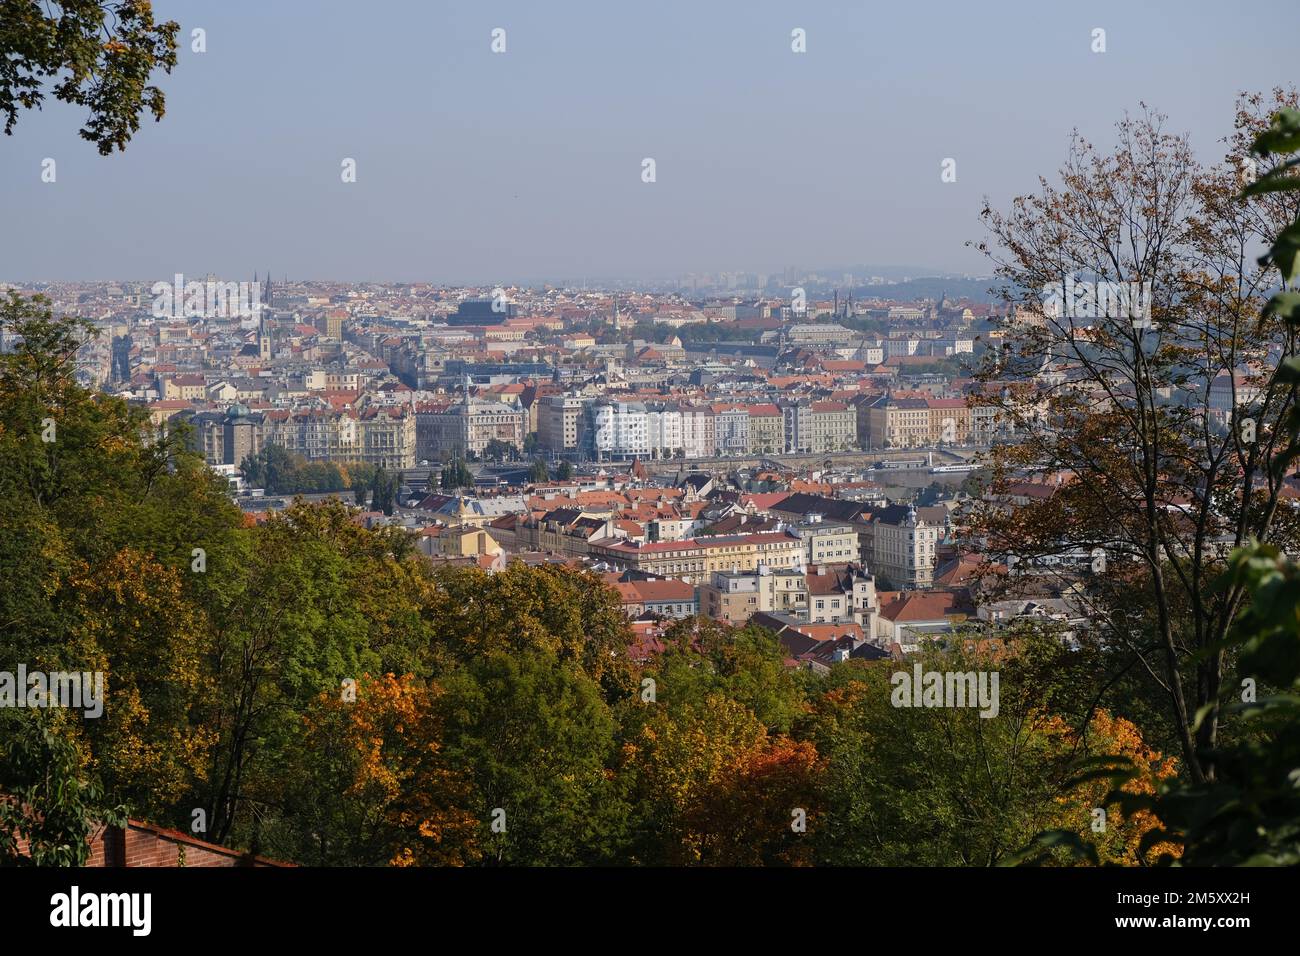 A beautiful areal view of the Strahov Park in Prague, Czech Republic Stock Photo